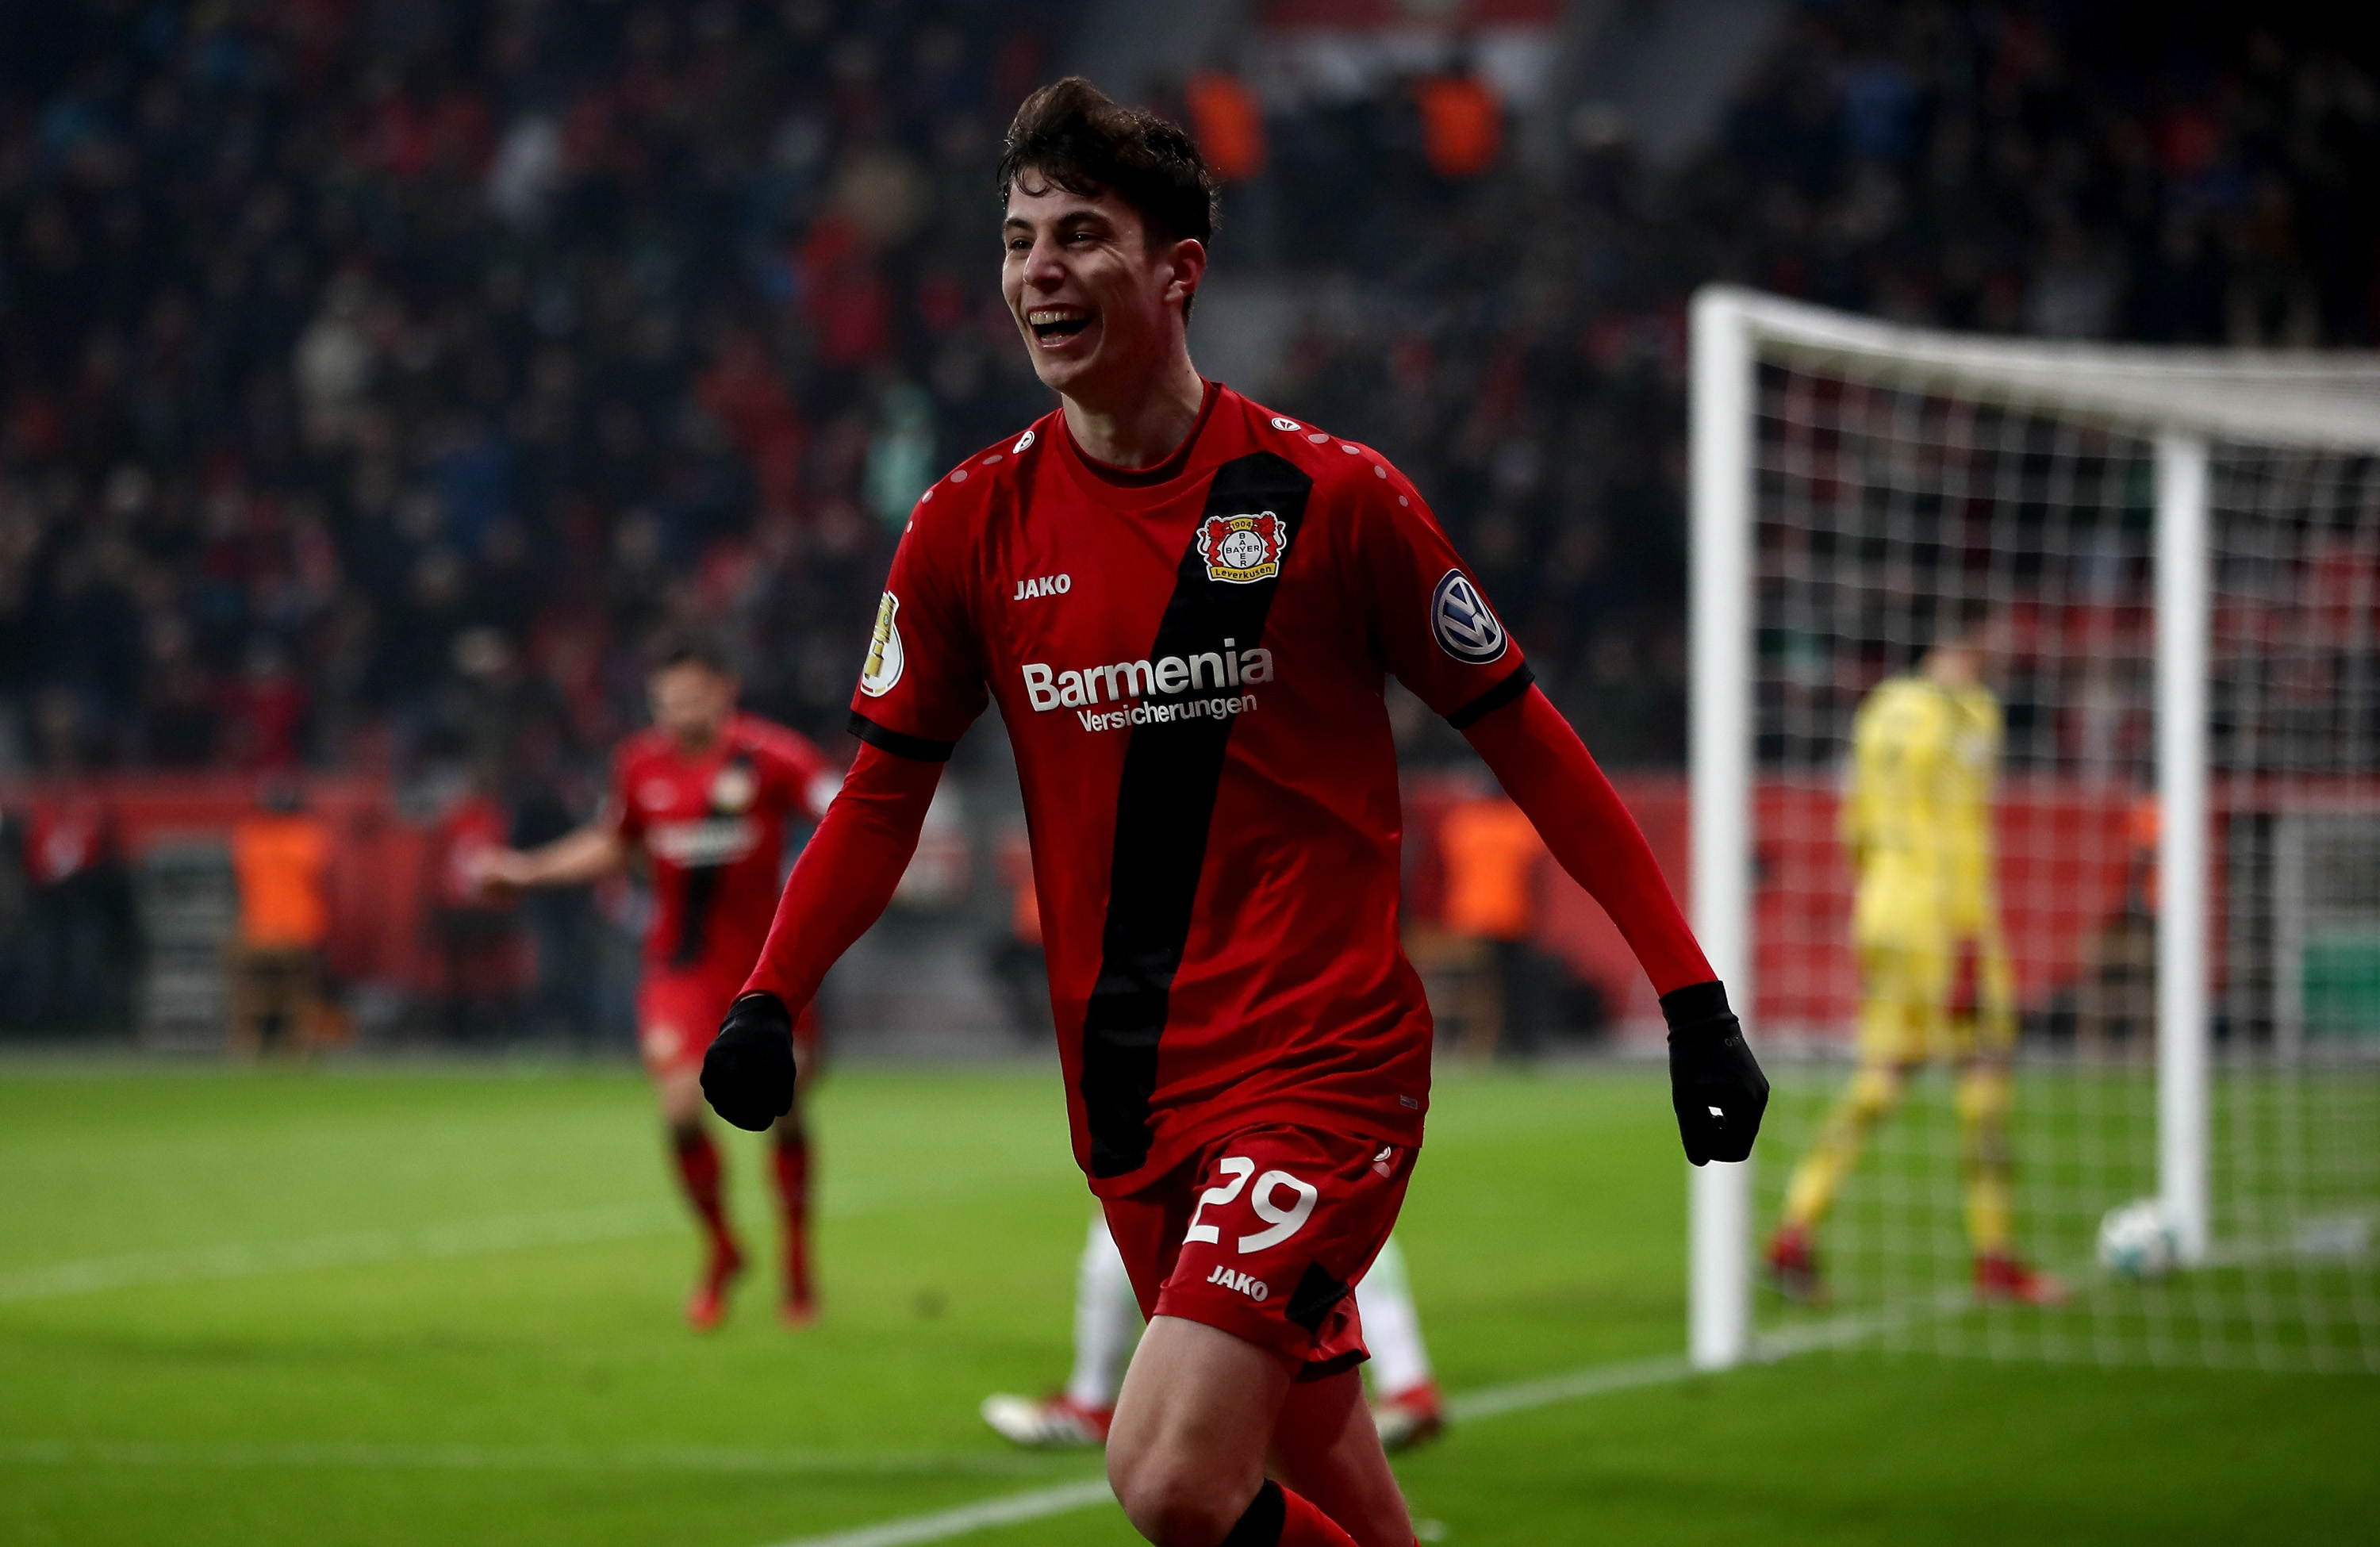 LEVERKUSEN, GERMANY - FEBRUARY 06: Kai Havertz of Leverkusen celebrates after he scores the 4th goal during extra time during the DFB Cup quarter final match between Bayer Leverkusen and Werder Bremen at BayArena on February 6, 2018 in Leverkusen, Germany. (Photo by Alex Grimm/Bongarts/Getty Images)